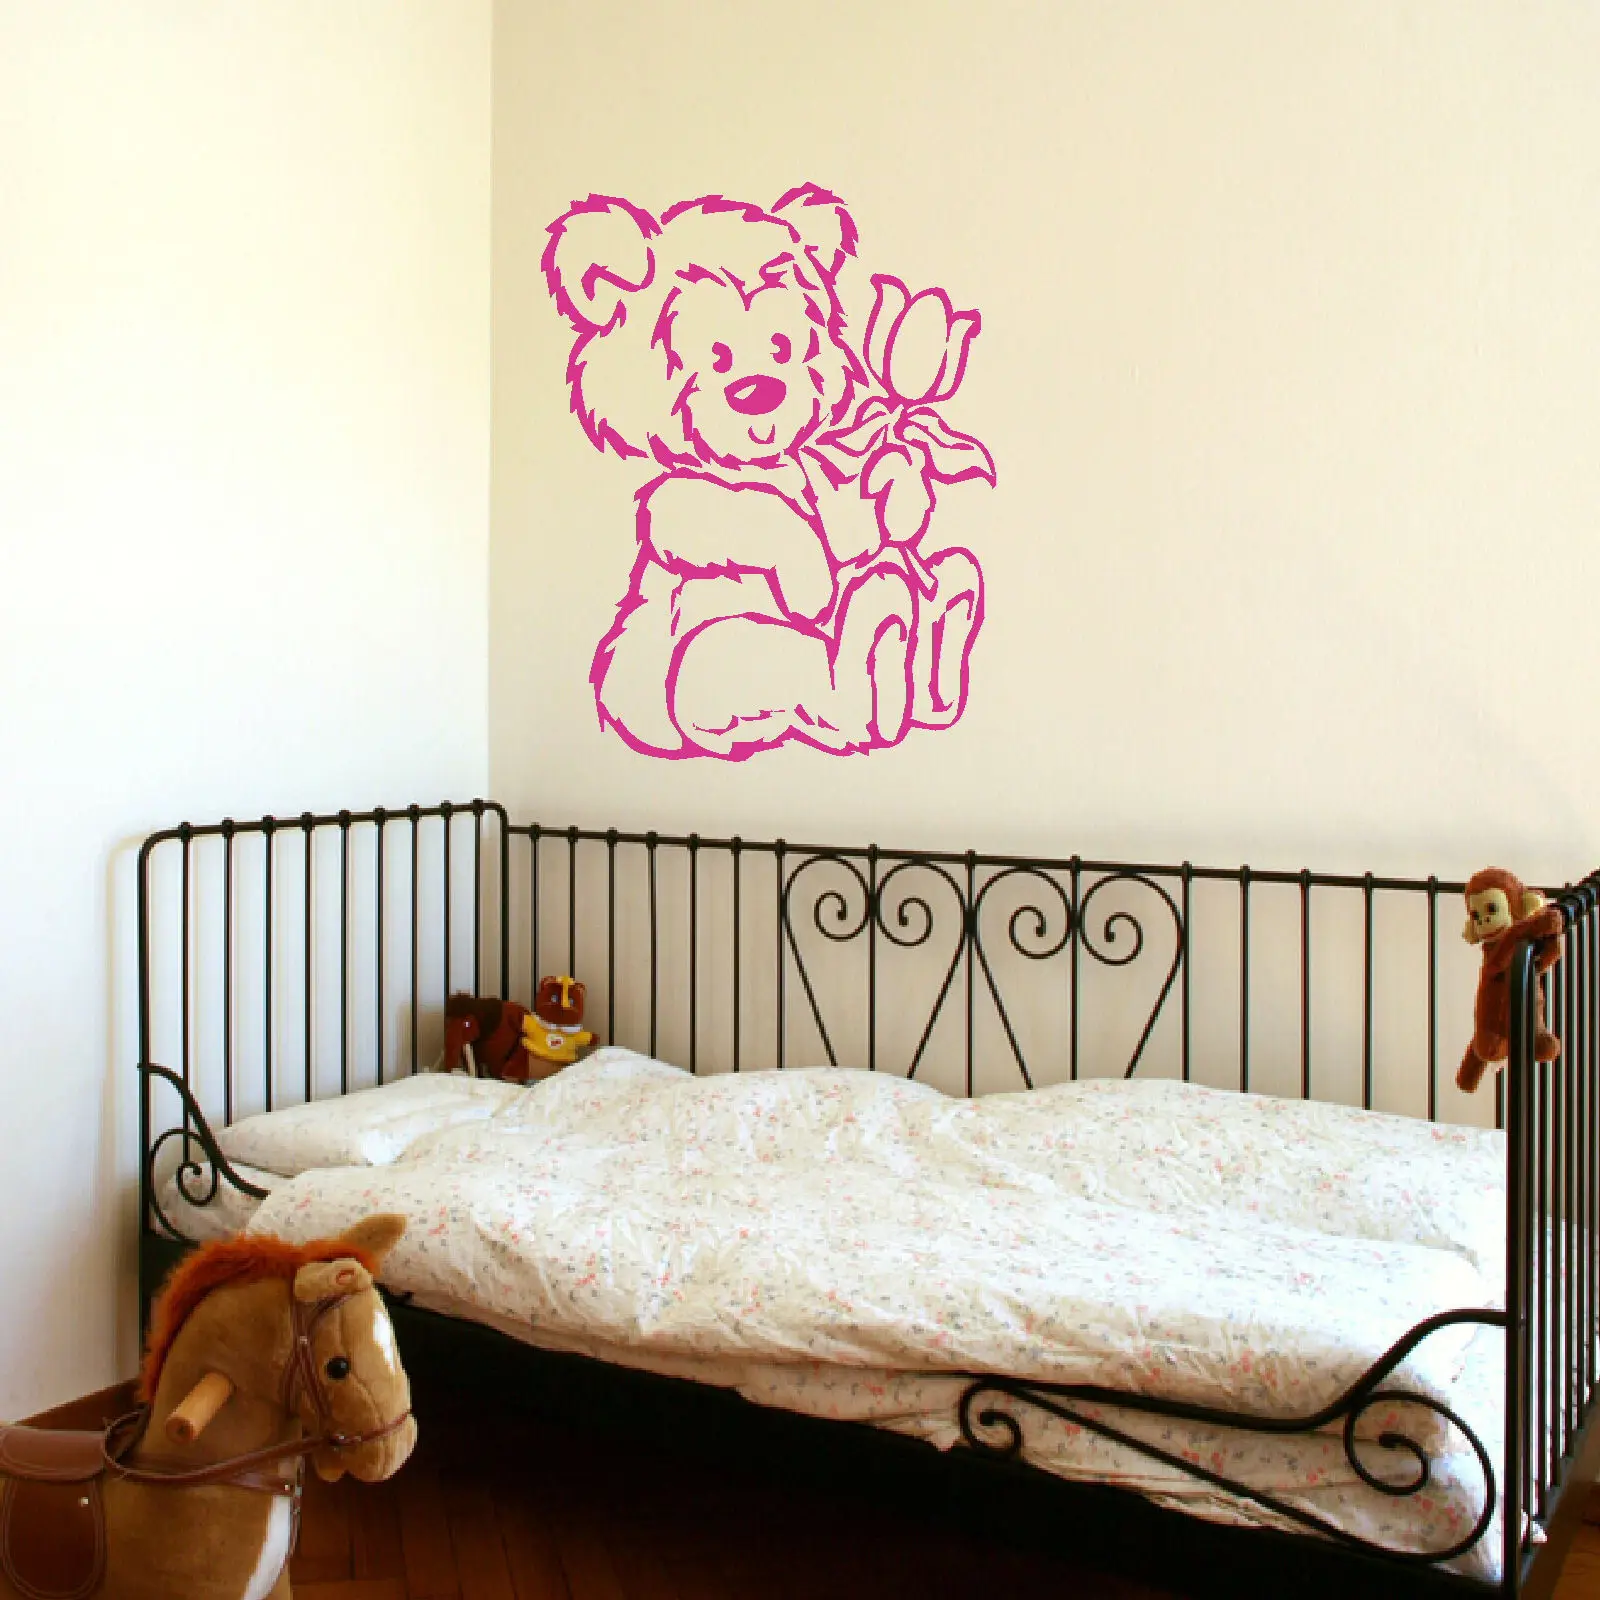 LARGE NURSERY BABY TEDDY BEAR WALL STICKER TRANSFER IN NEW SIZES POSTER DECAL 